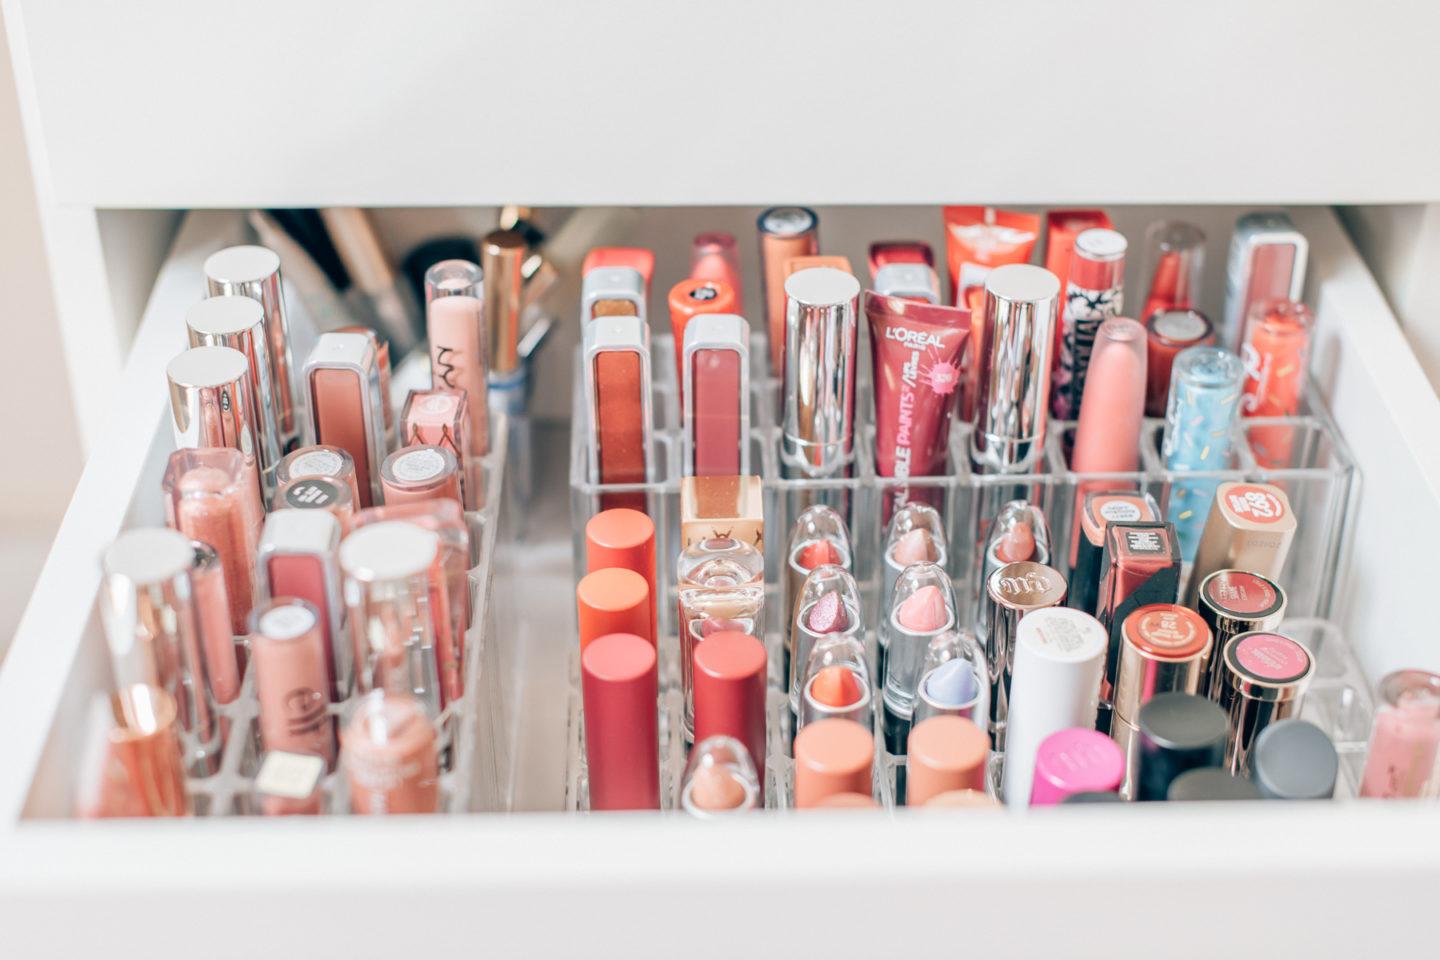 Makeup vanity organization ideas, by lifestyle blogger What The Fab